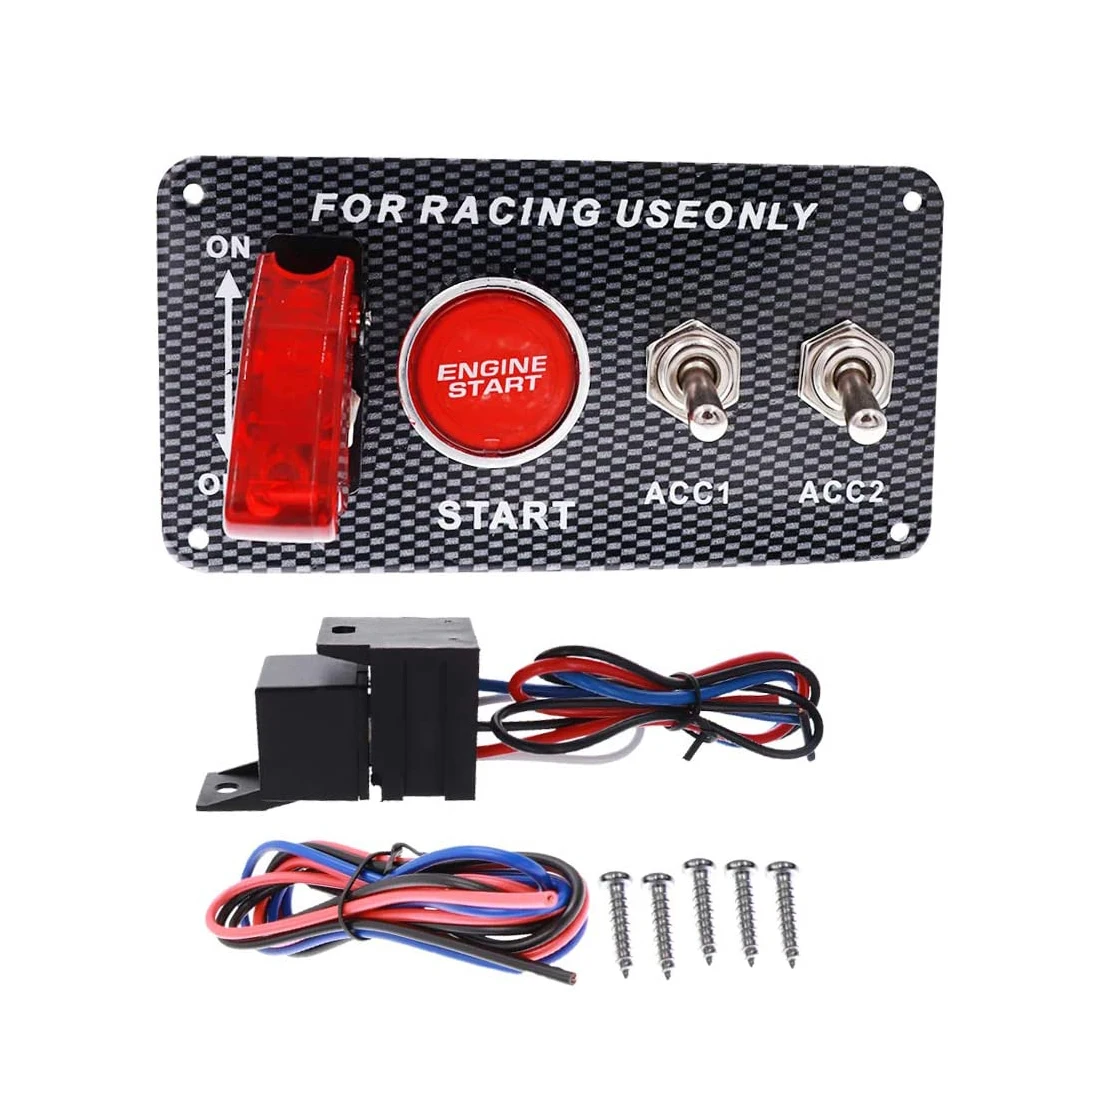 12V 4 Group Toggle Engine Start Push Button for Racing Car Akozon Ignition Switch Panel 